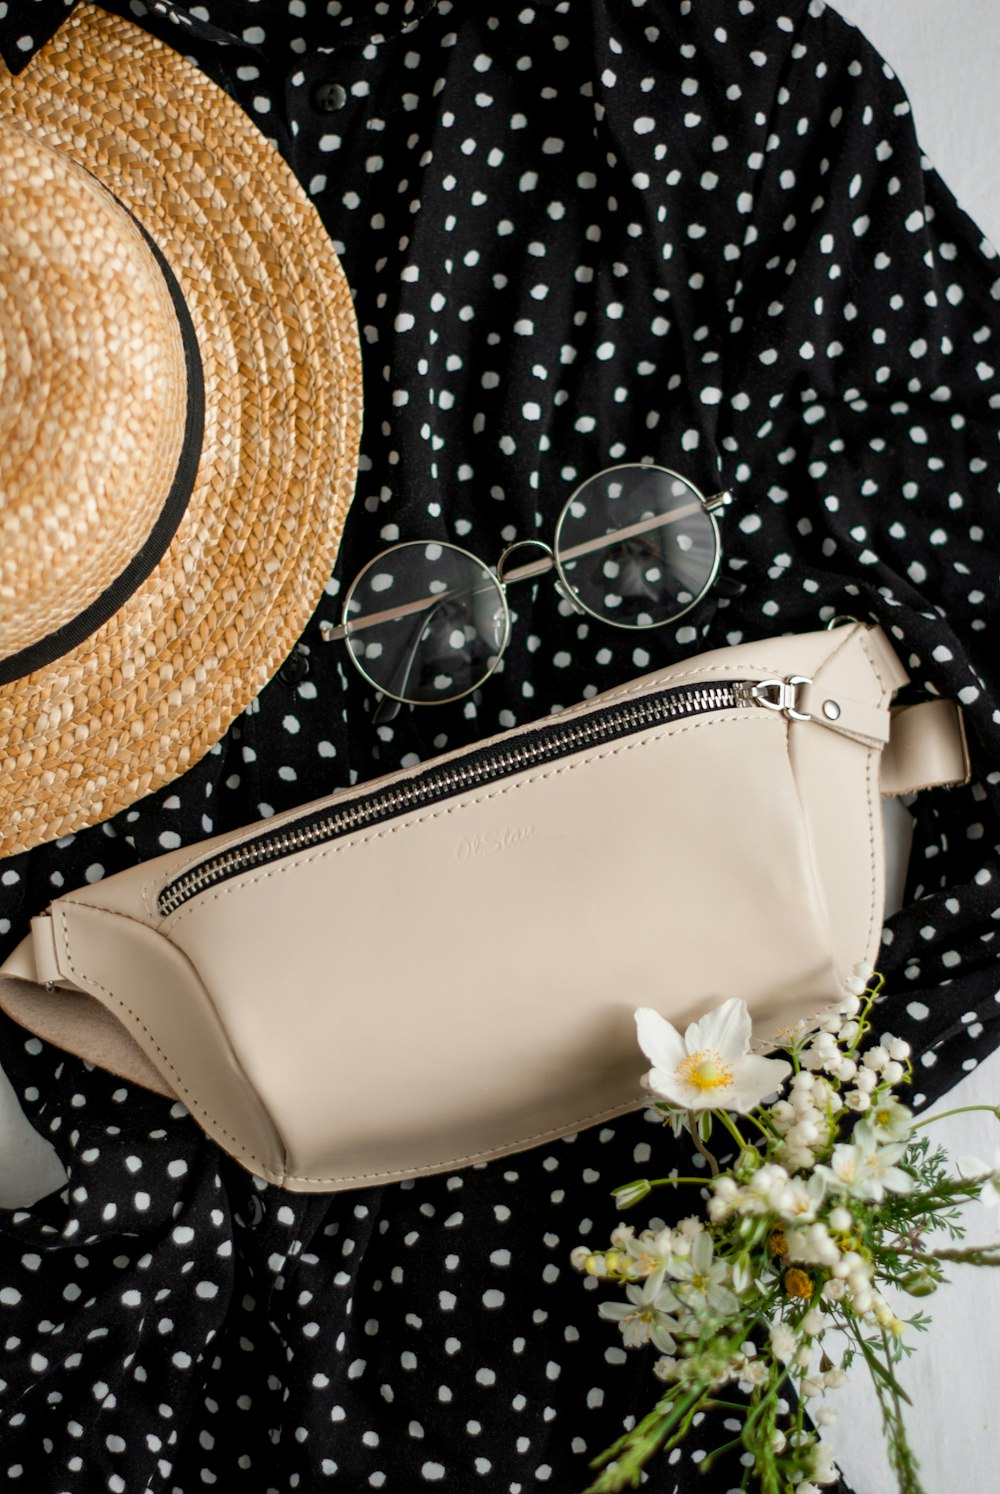 white leather sling bag beside brown straw hat